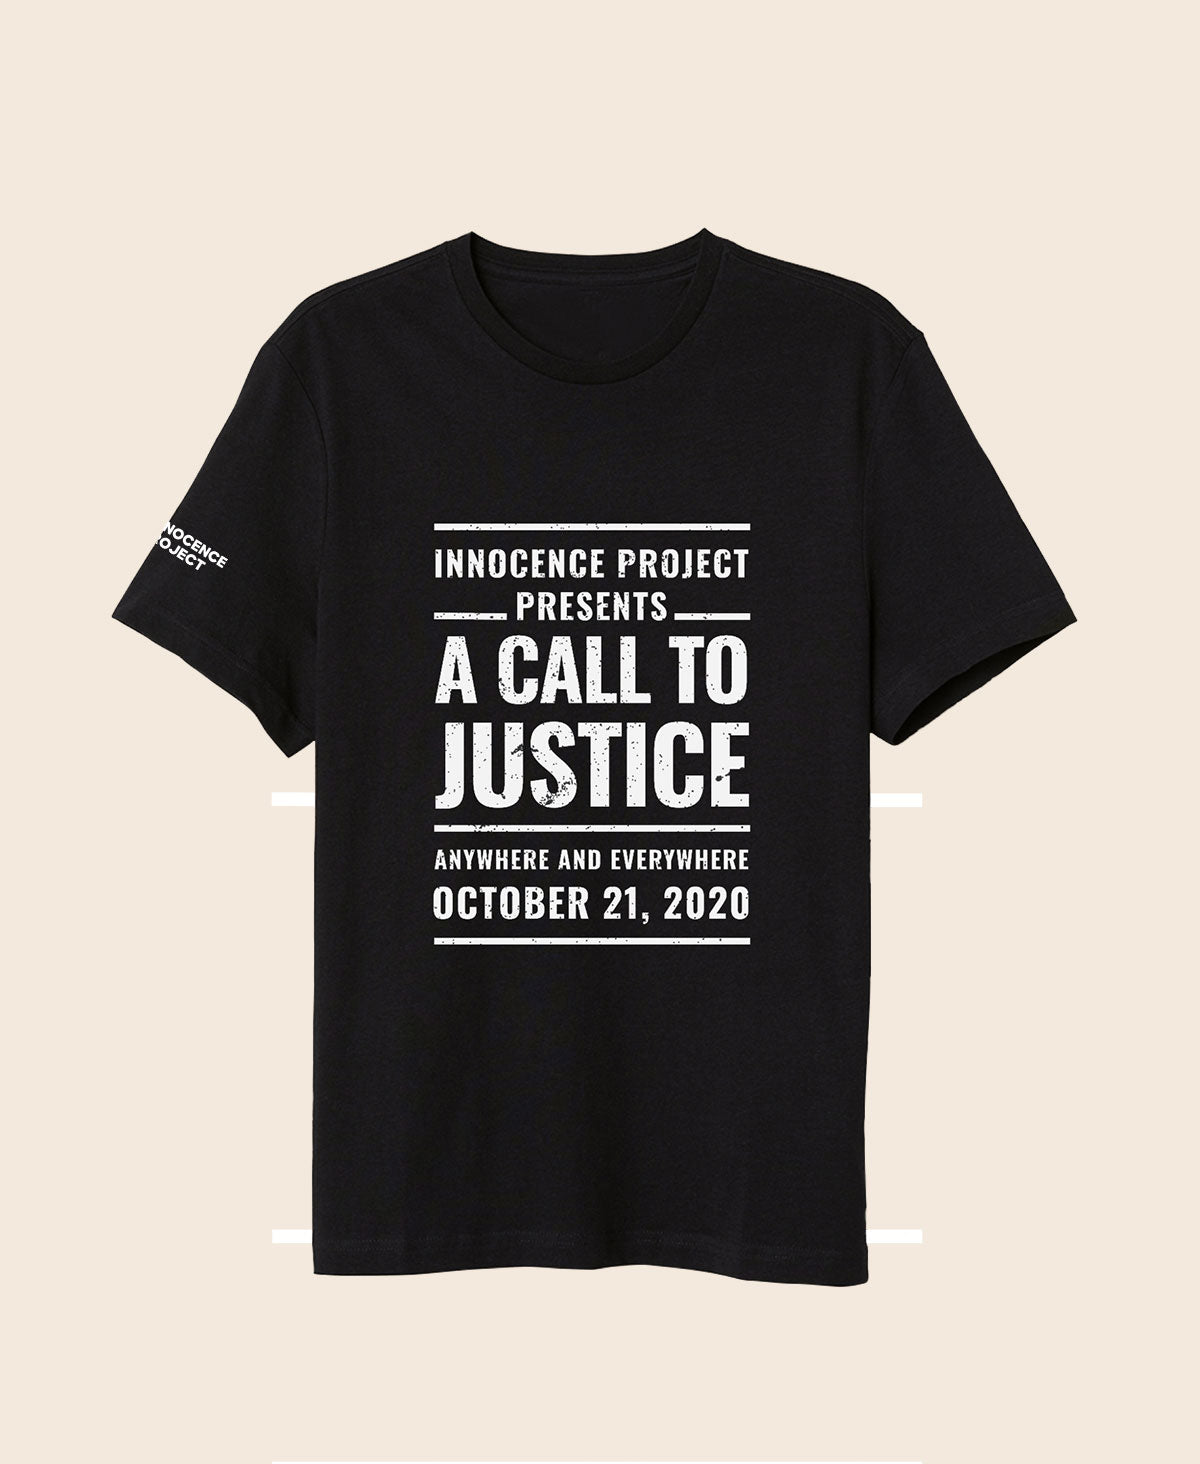 A Call to Justice - Event T-shirt